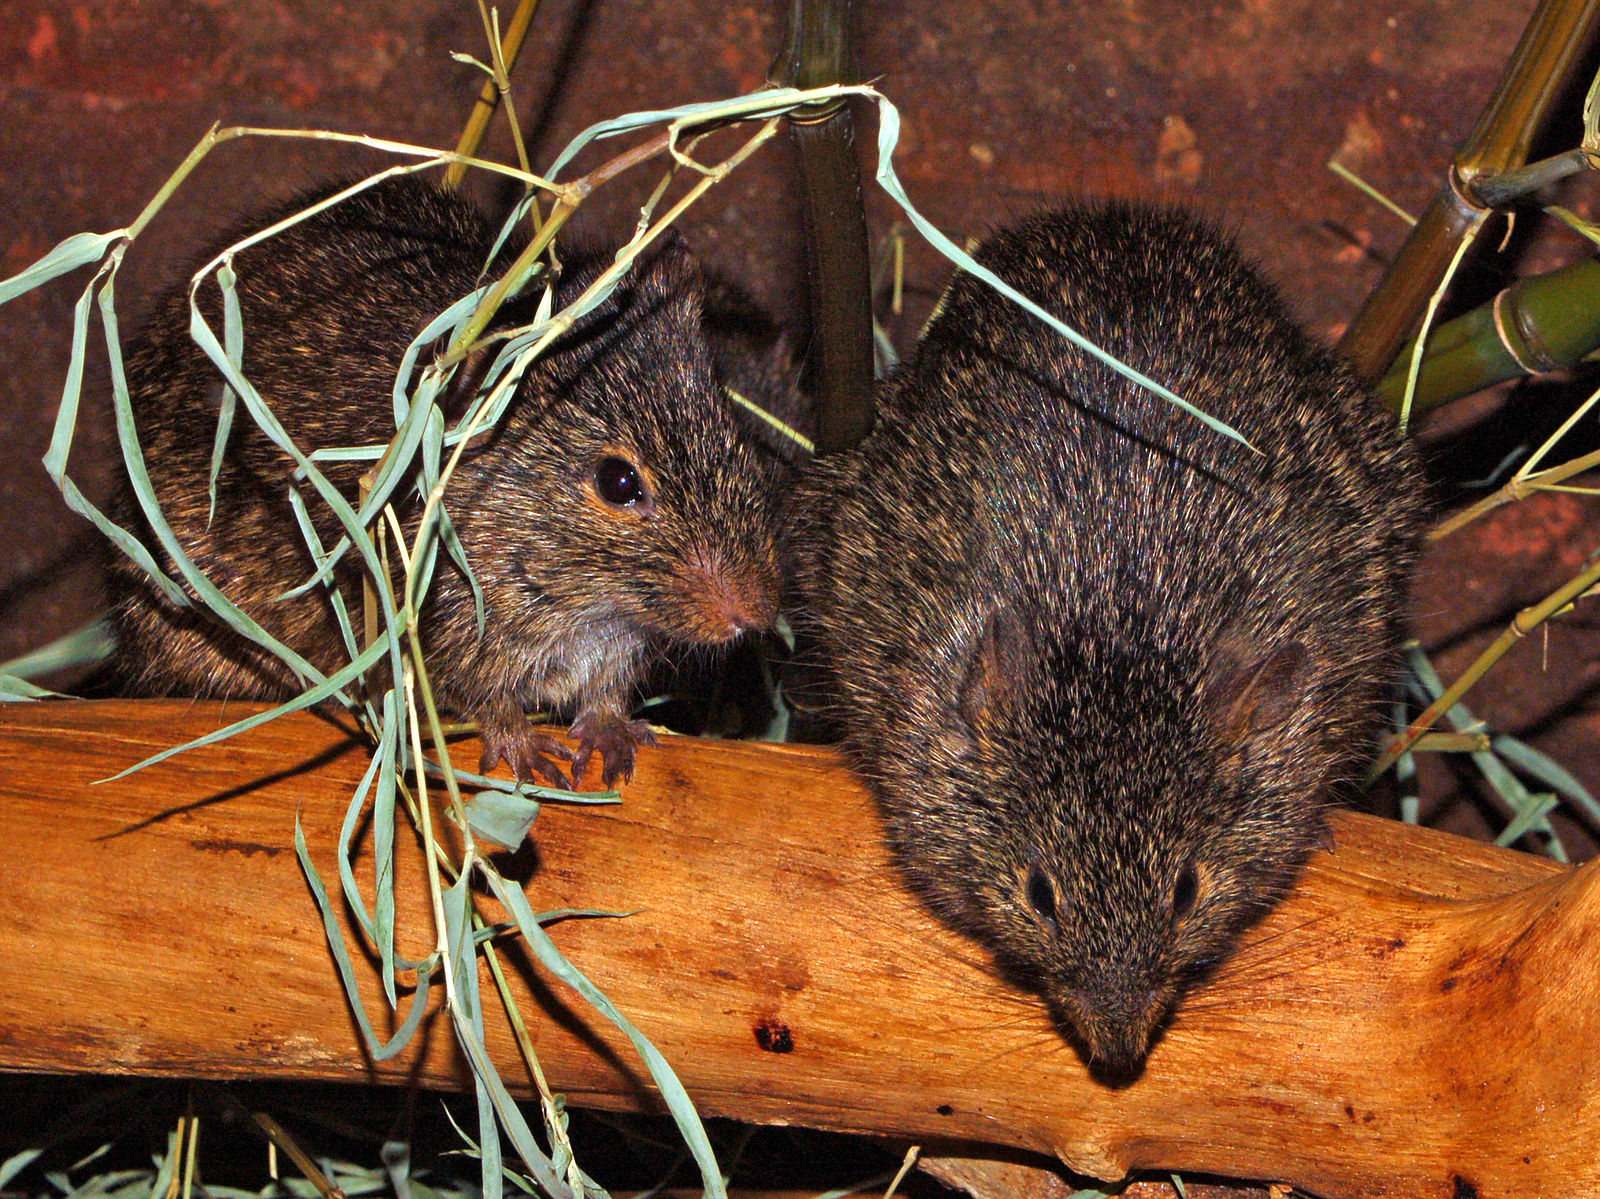 African grass rats (photo credit: Hectonichus, used under CC BY-SA 3.0)